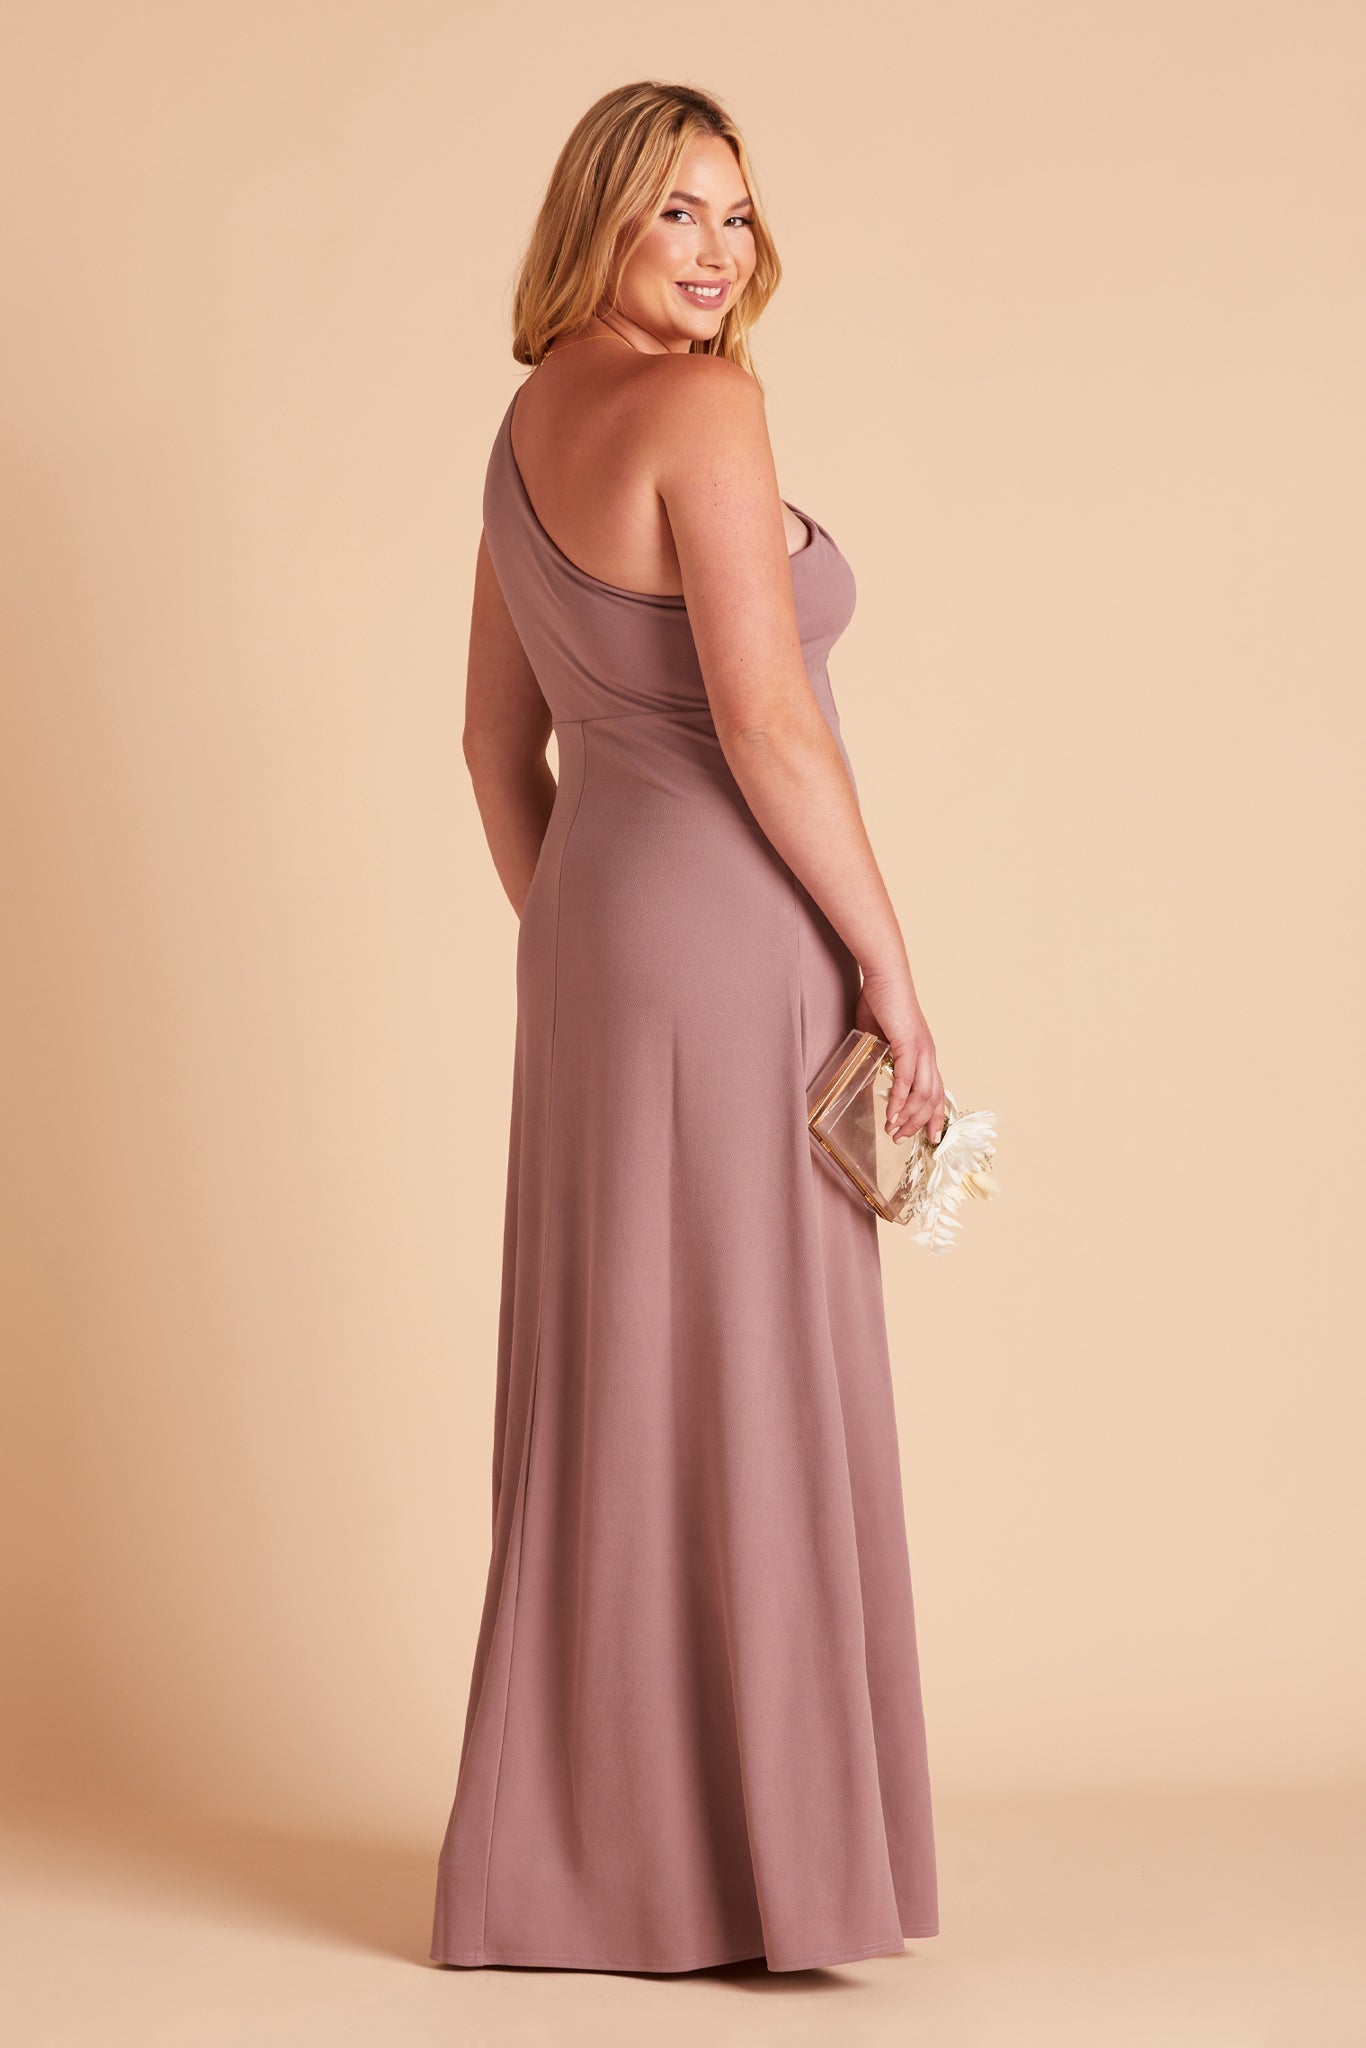 Kira plus size bridesmaid dress with slit in dark mauve crepe by Birdy Grey, side view